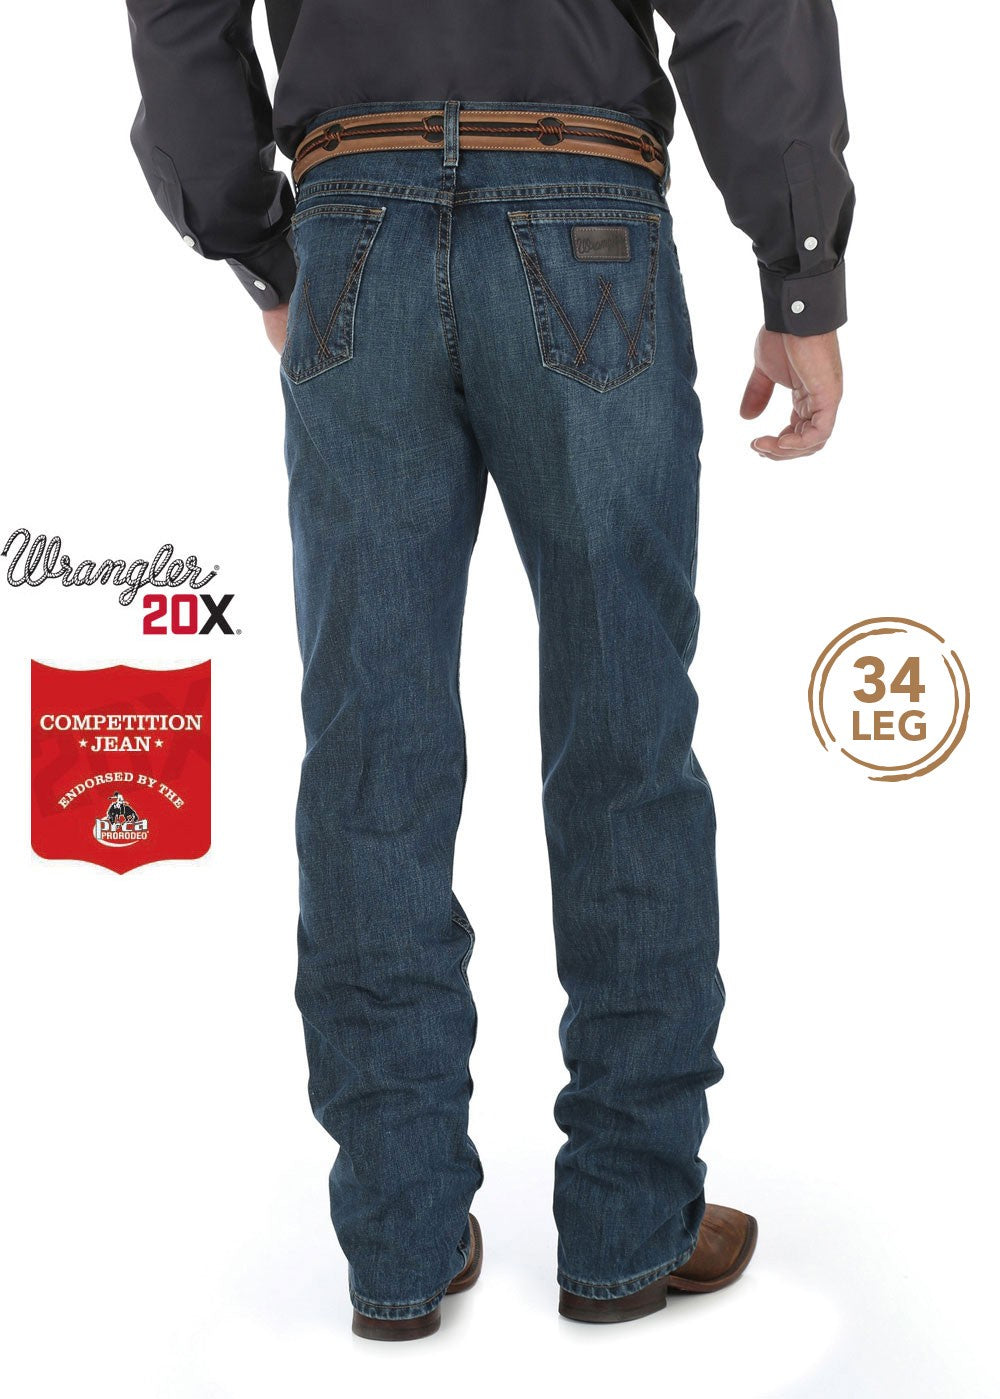 Mens Wrangler 20X Comp Relaxed Jean - River Wash (6575511535693)